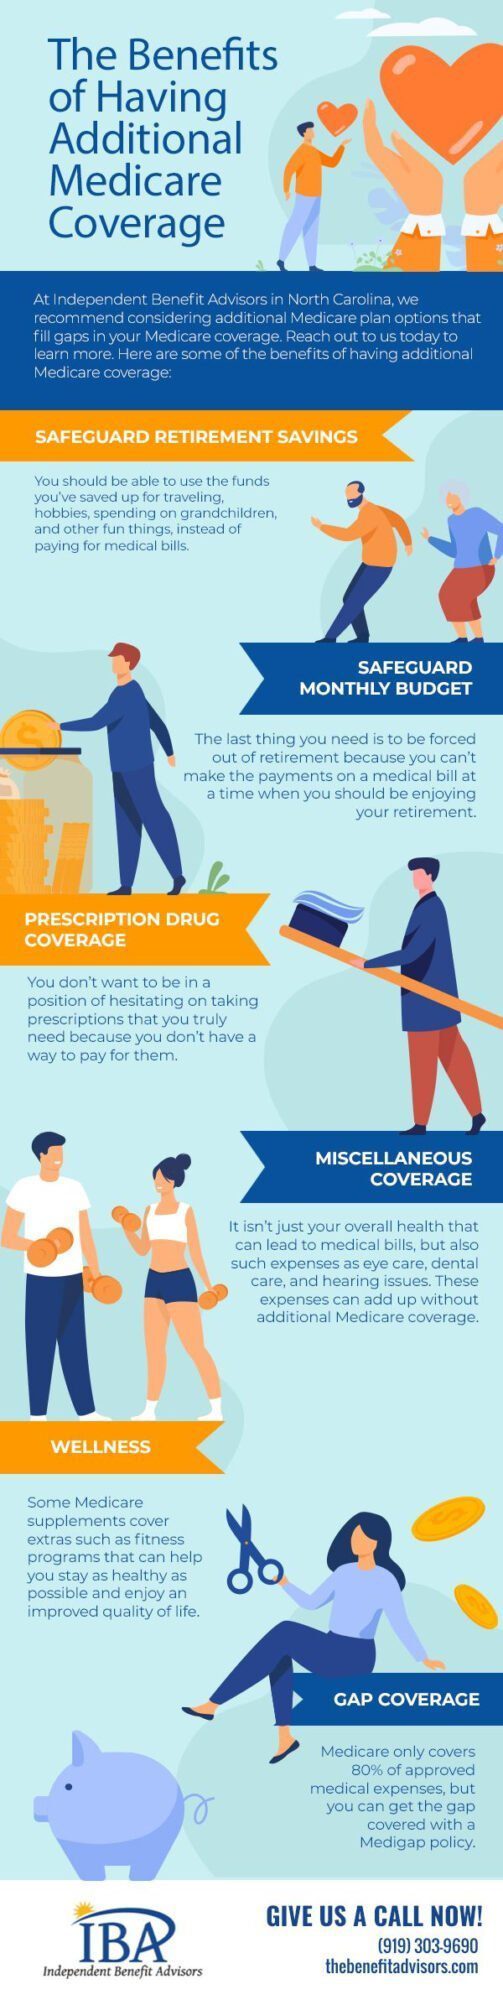 The Benefits of Having Additional Medicare Coverage [infographic]